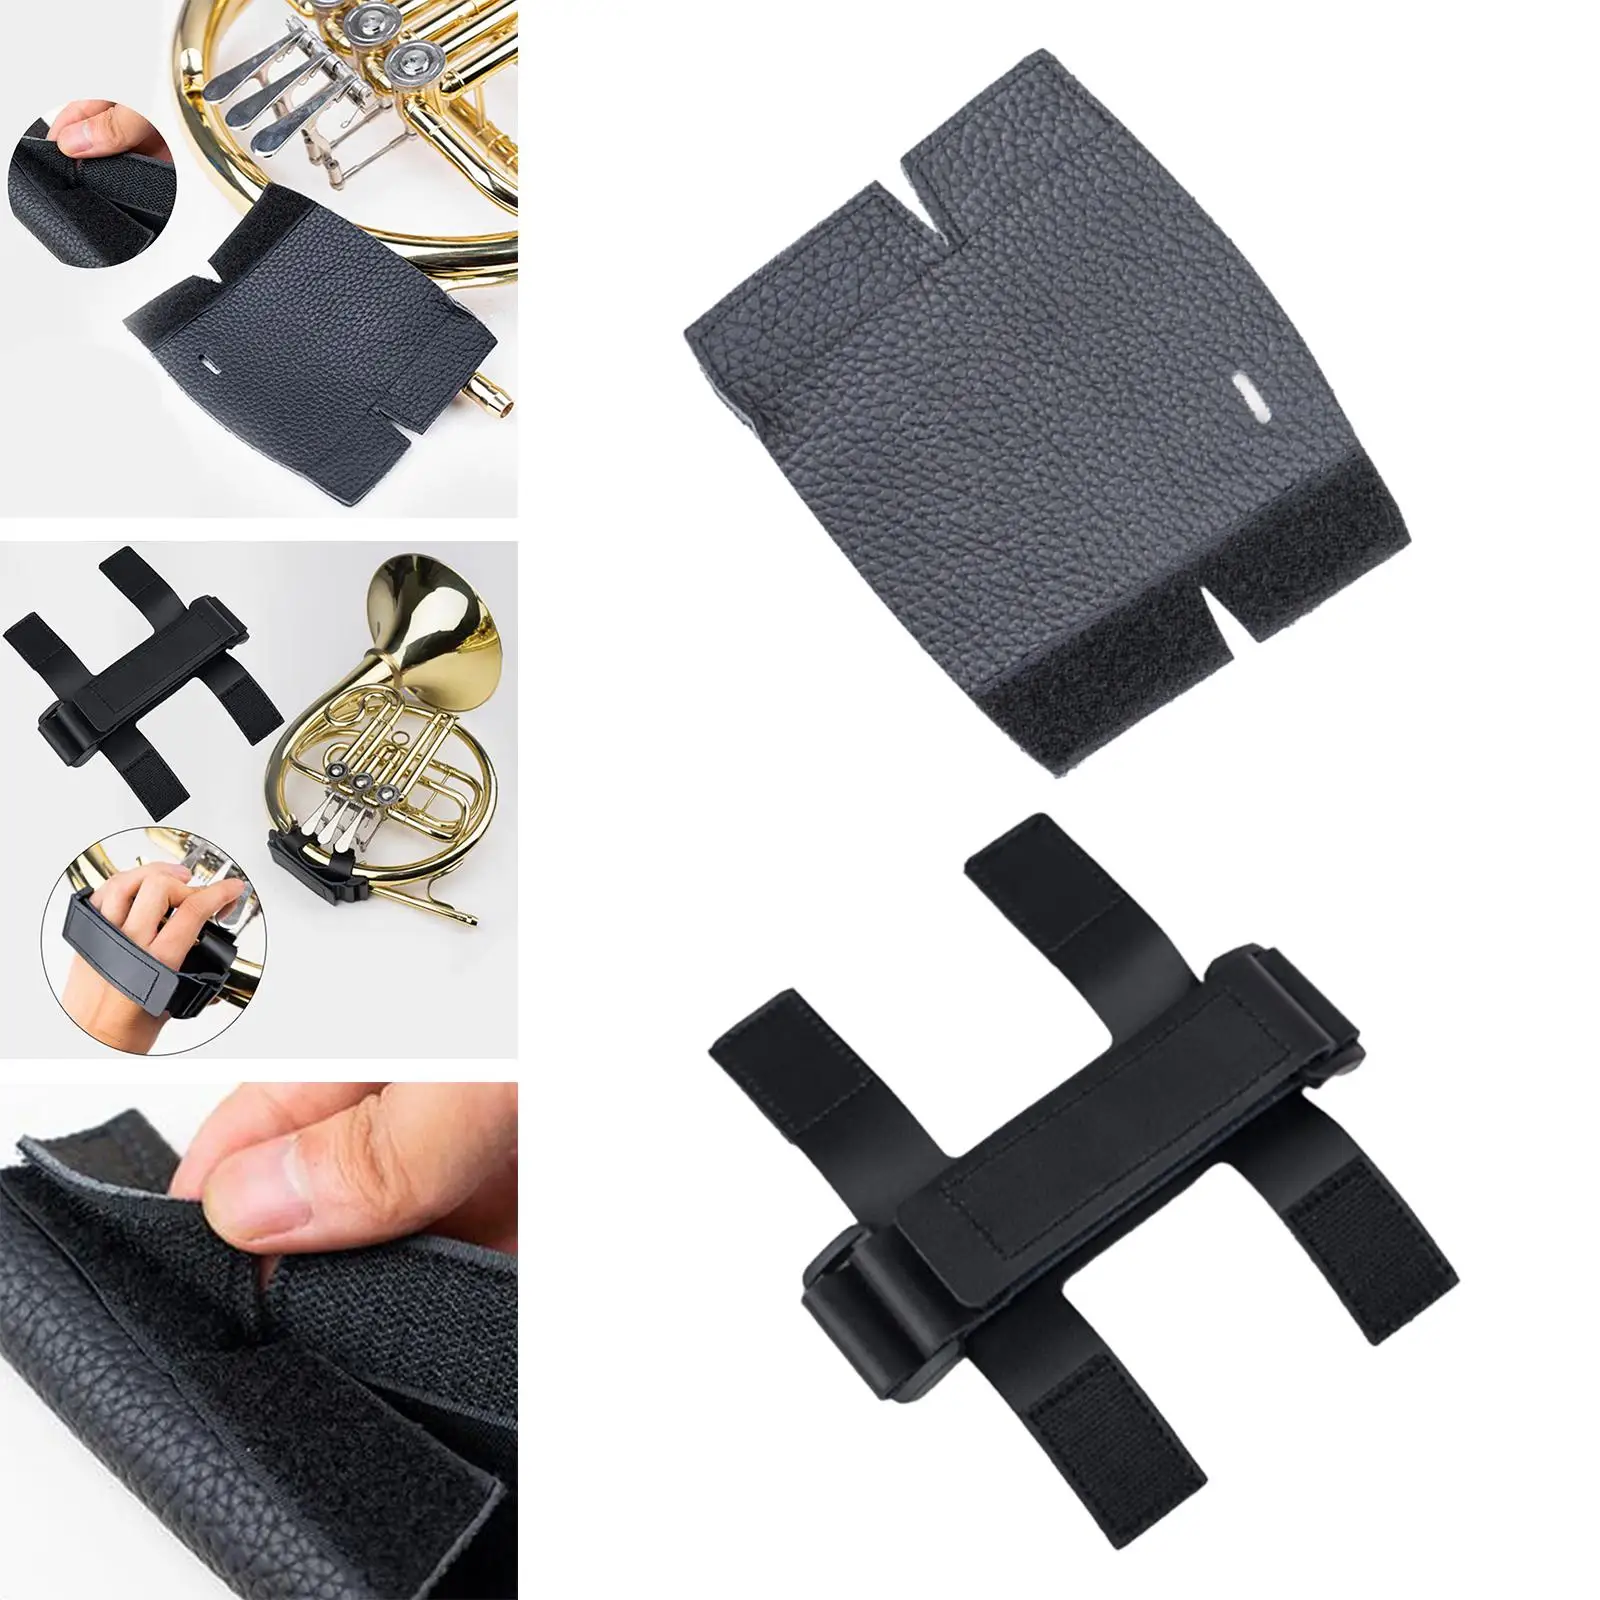 French Horn Hand Guard Adjustable Wear Resistant PU Leather Wrap Cover Wrap Cover for Tour Practice Performance Stage Exercise